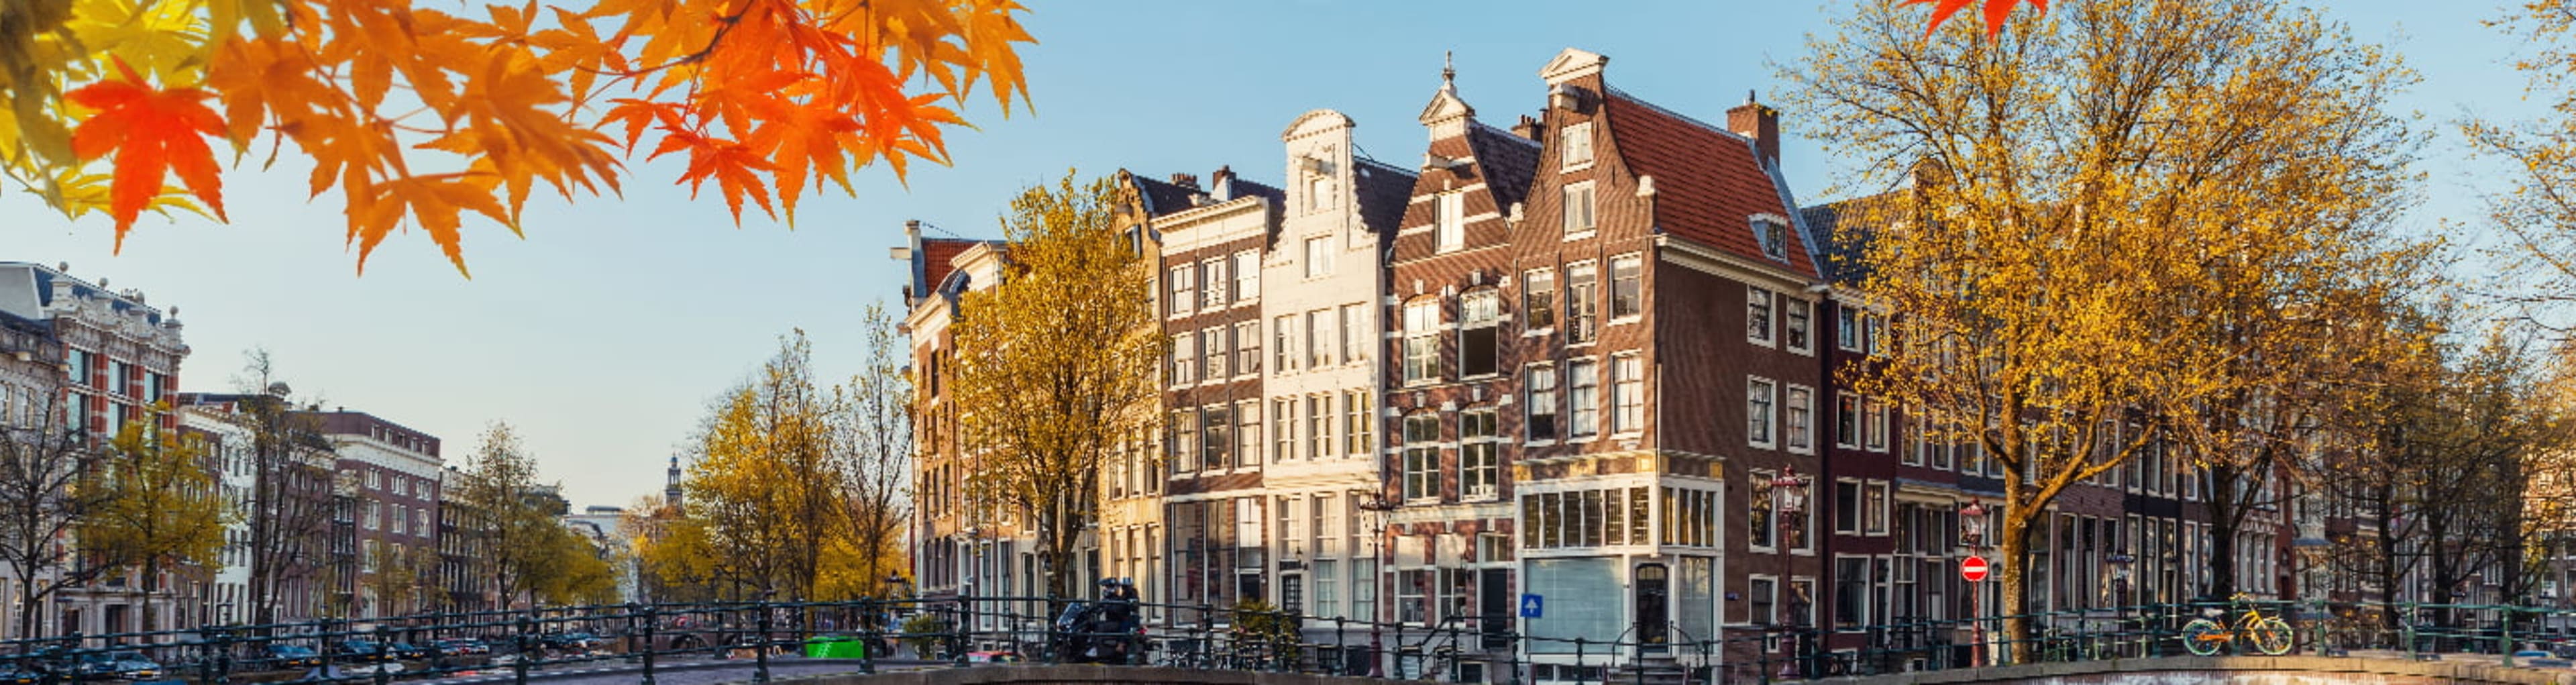 Amsterdam bridge and canal houses surrounded by fall-colored trees